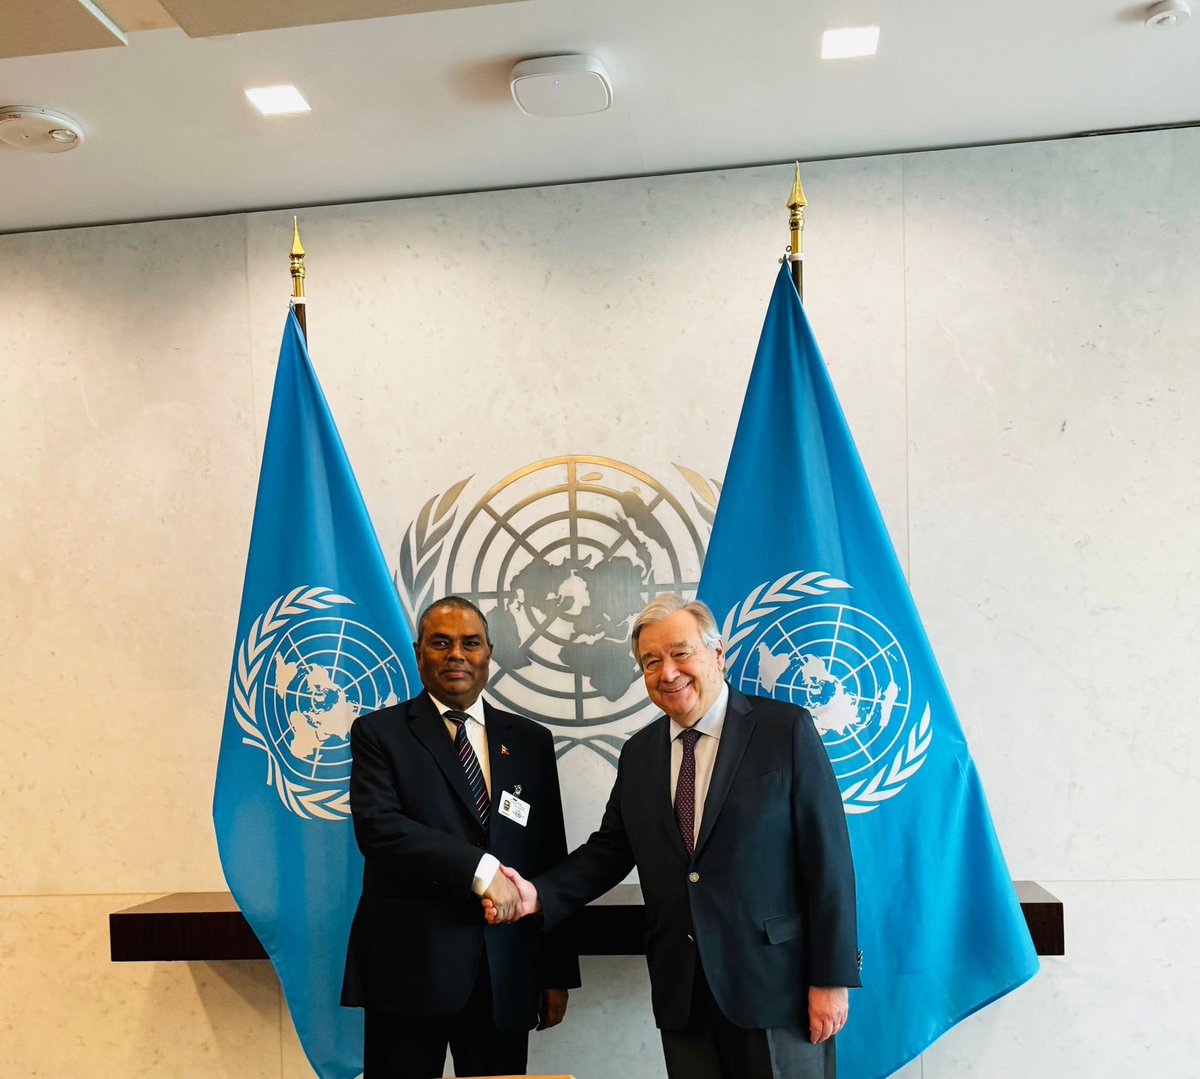 Hon. @upendrayadavjee, DPM/Minister for Health & Population met with UNSG @antonioguterres. They discussed Nepal-UN relations including Nepal's contribution to global peace & security through peacekeeping, SDGs, climate justice & partnership on health & population issues.